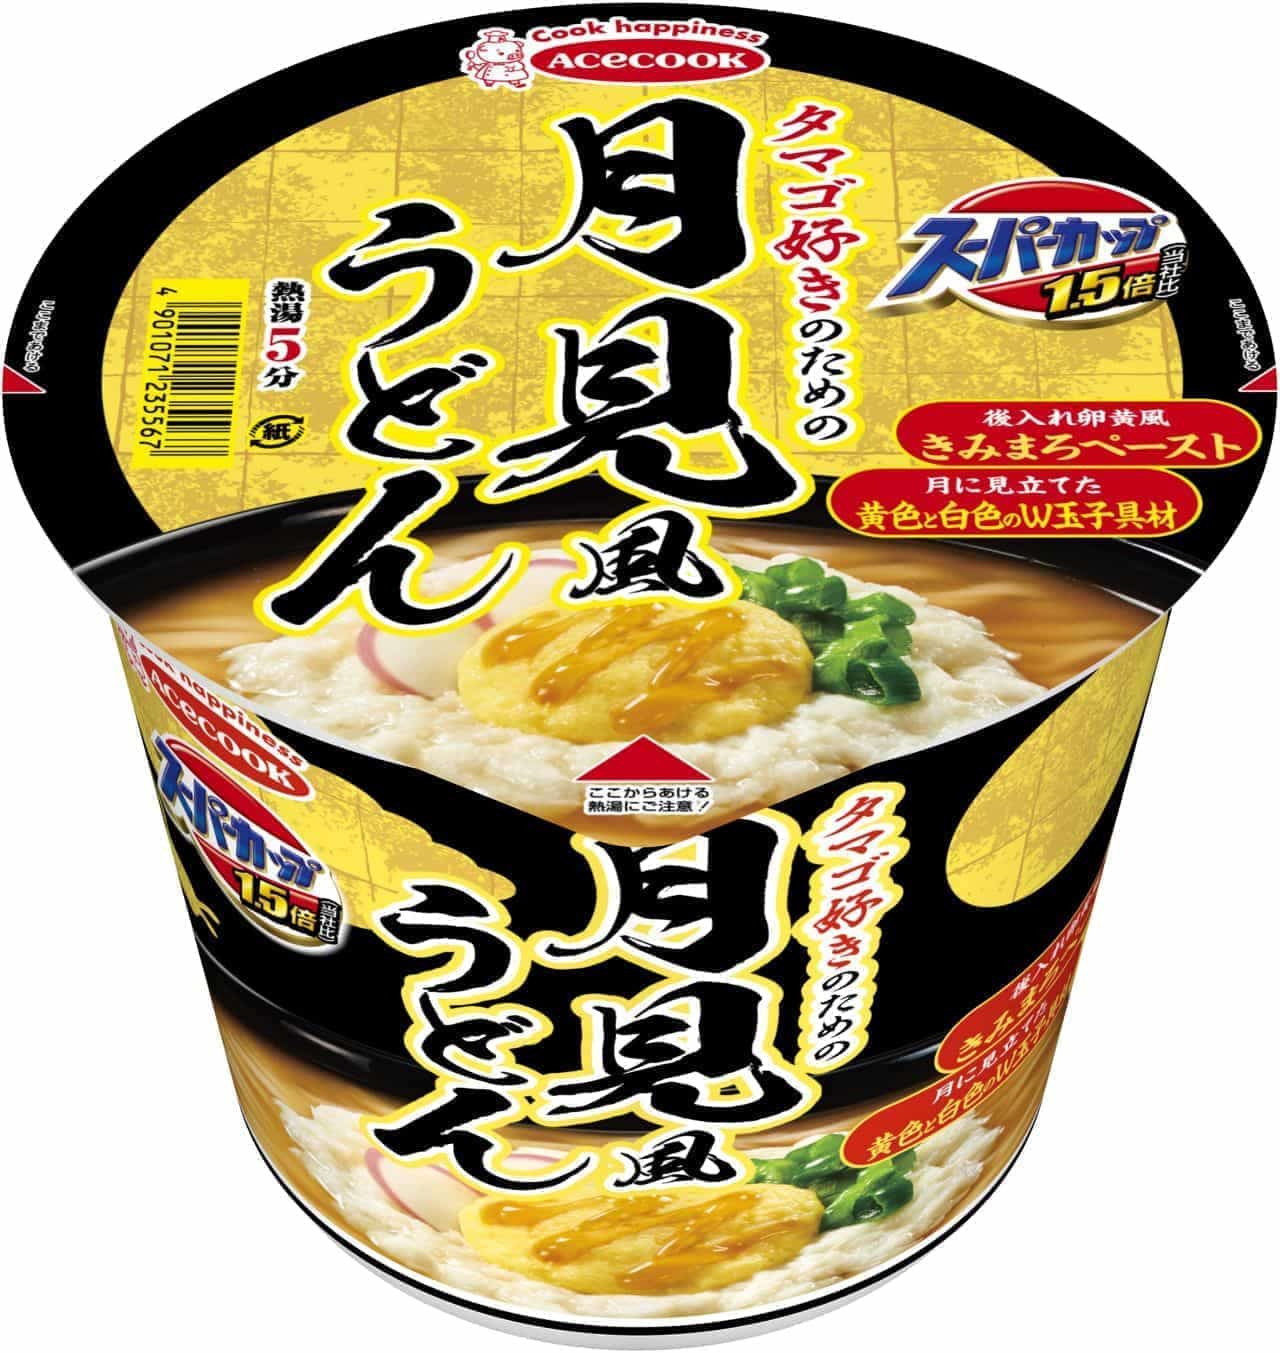 Super Cup 1 5 Times Tsukimi Style Udon For Egg Lovers Yellow White W Egg Included Mellow Tailoring With Egg Yolk Style Kimimaro Paste Entabe